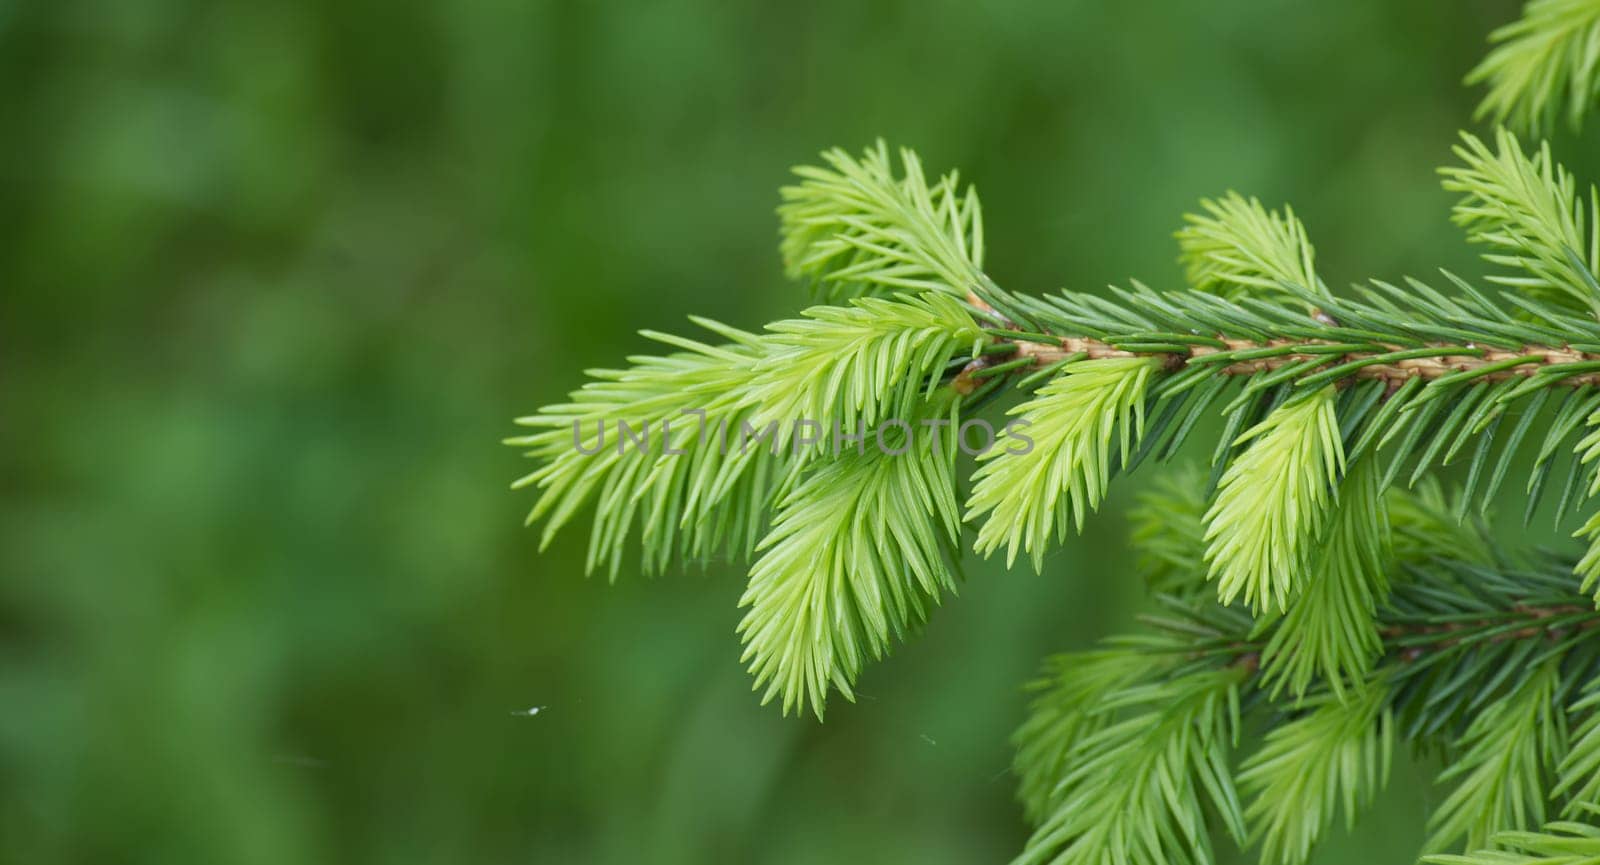 Close-up of a young green pine tree branch with fresh needles, showcasing natural growth and vibrant greenery.